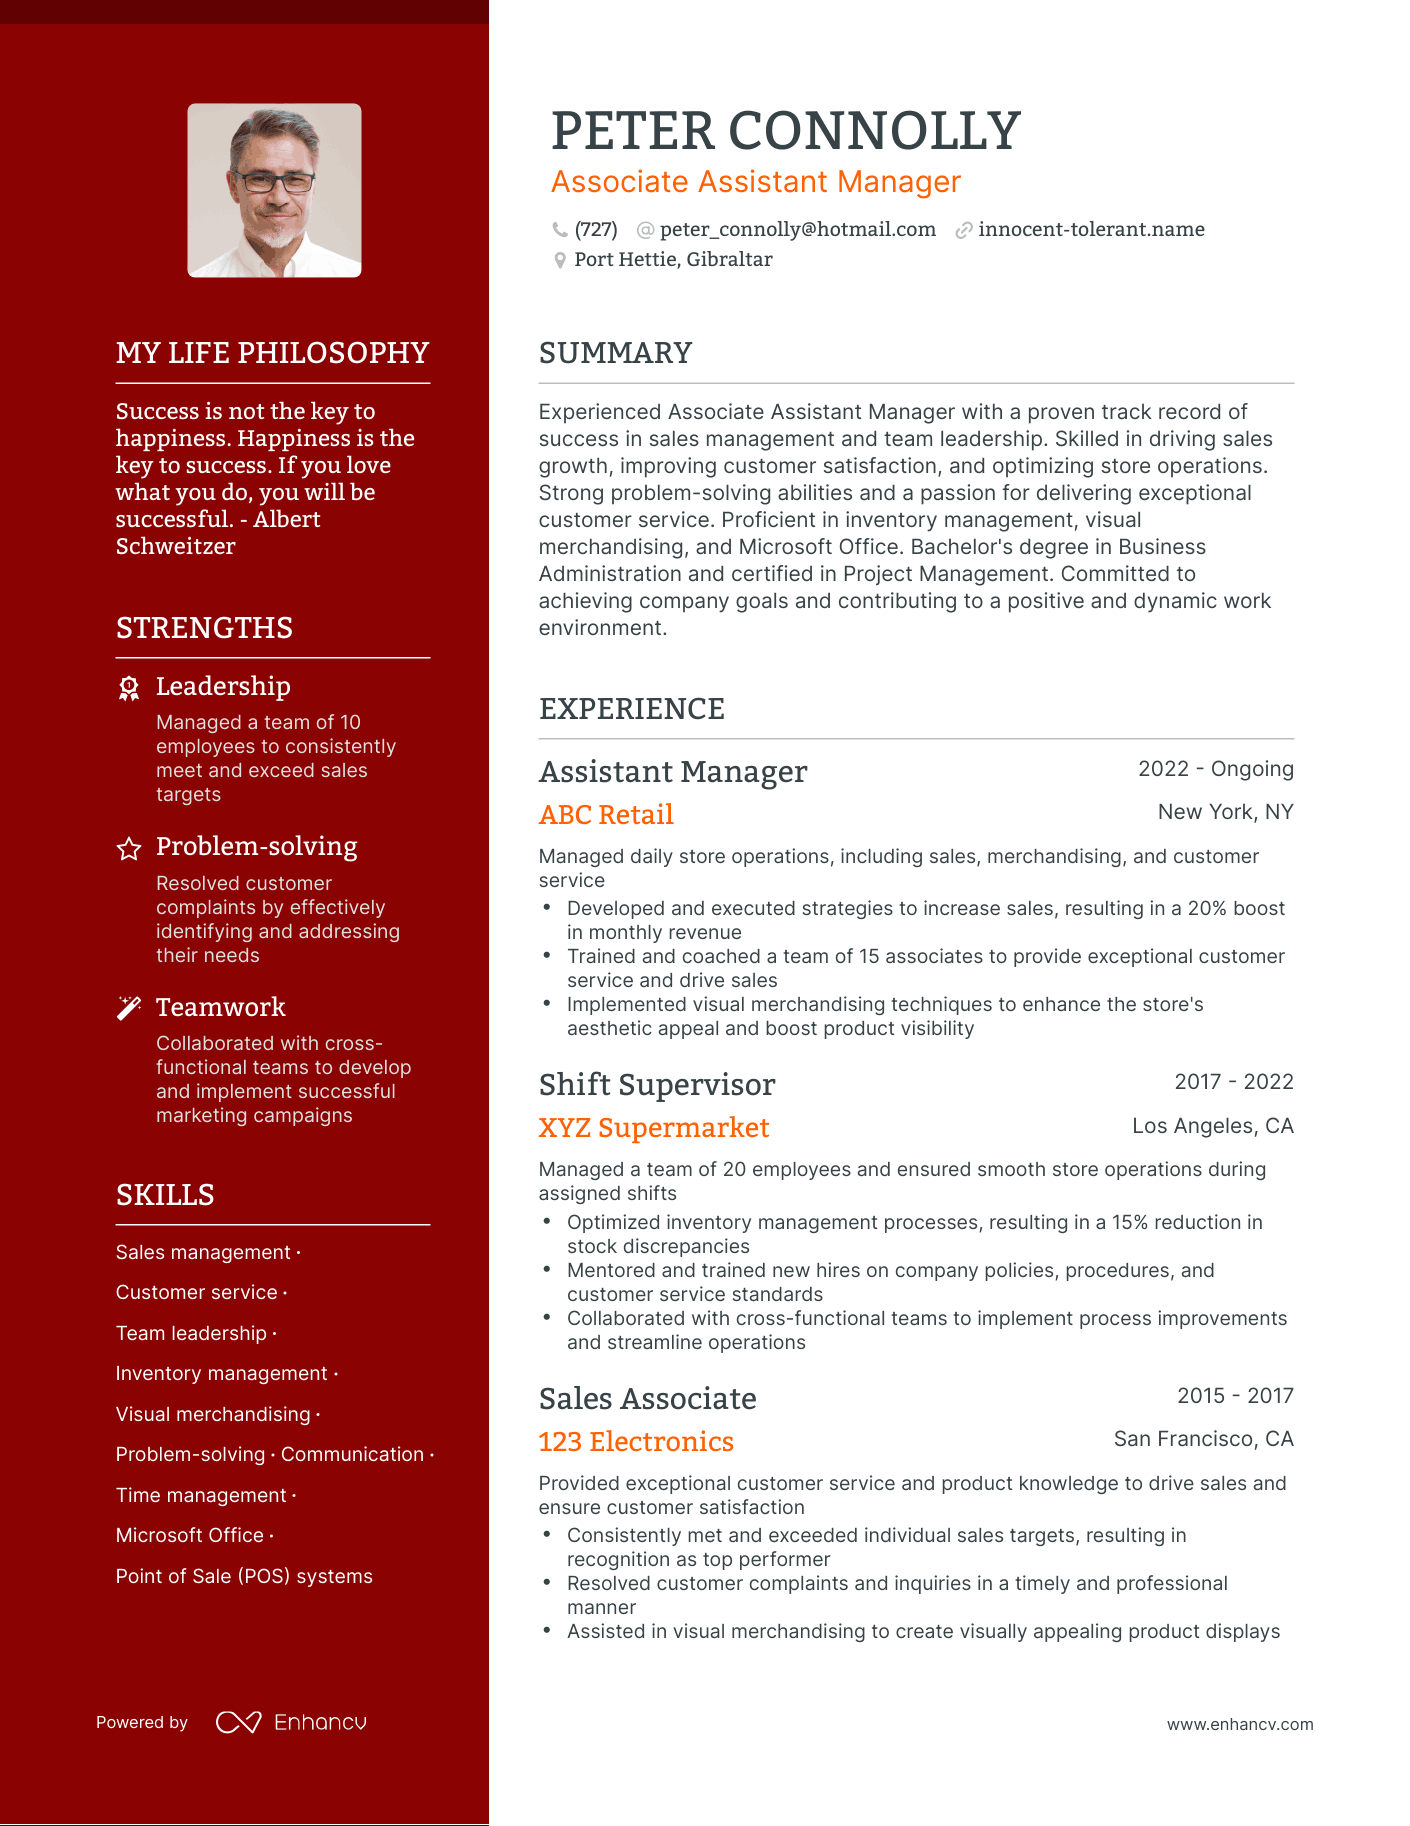 Associate Assistant Manager resume example